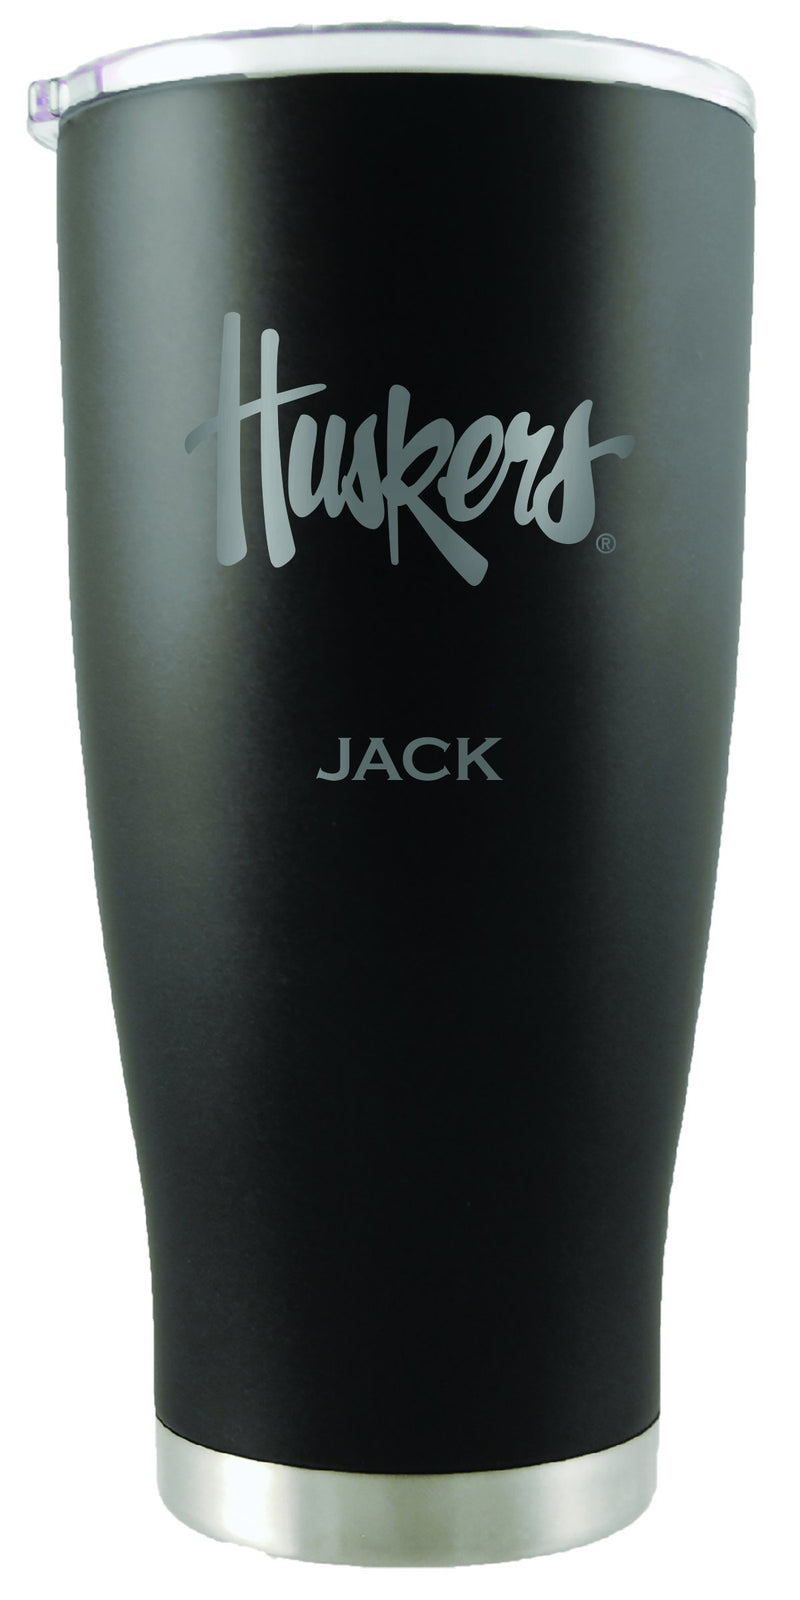 20oz Black Personalized Stainless Steel Tumbler | Nebraska
COL, CurrentProduct, Drinkware_category_All, NEB, Nebraska Cornhuskers, Personalized_Personalized
The Memory Company